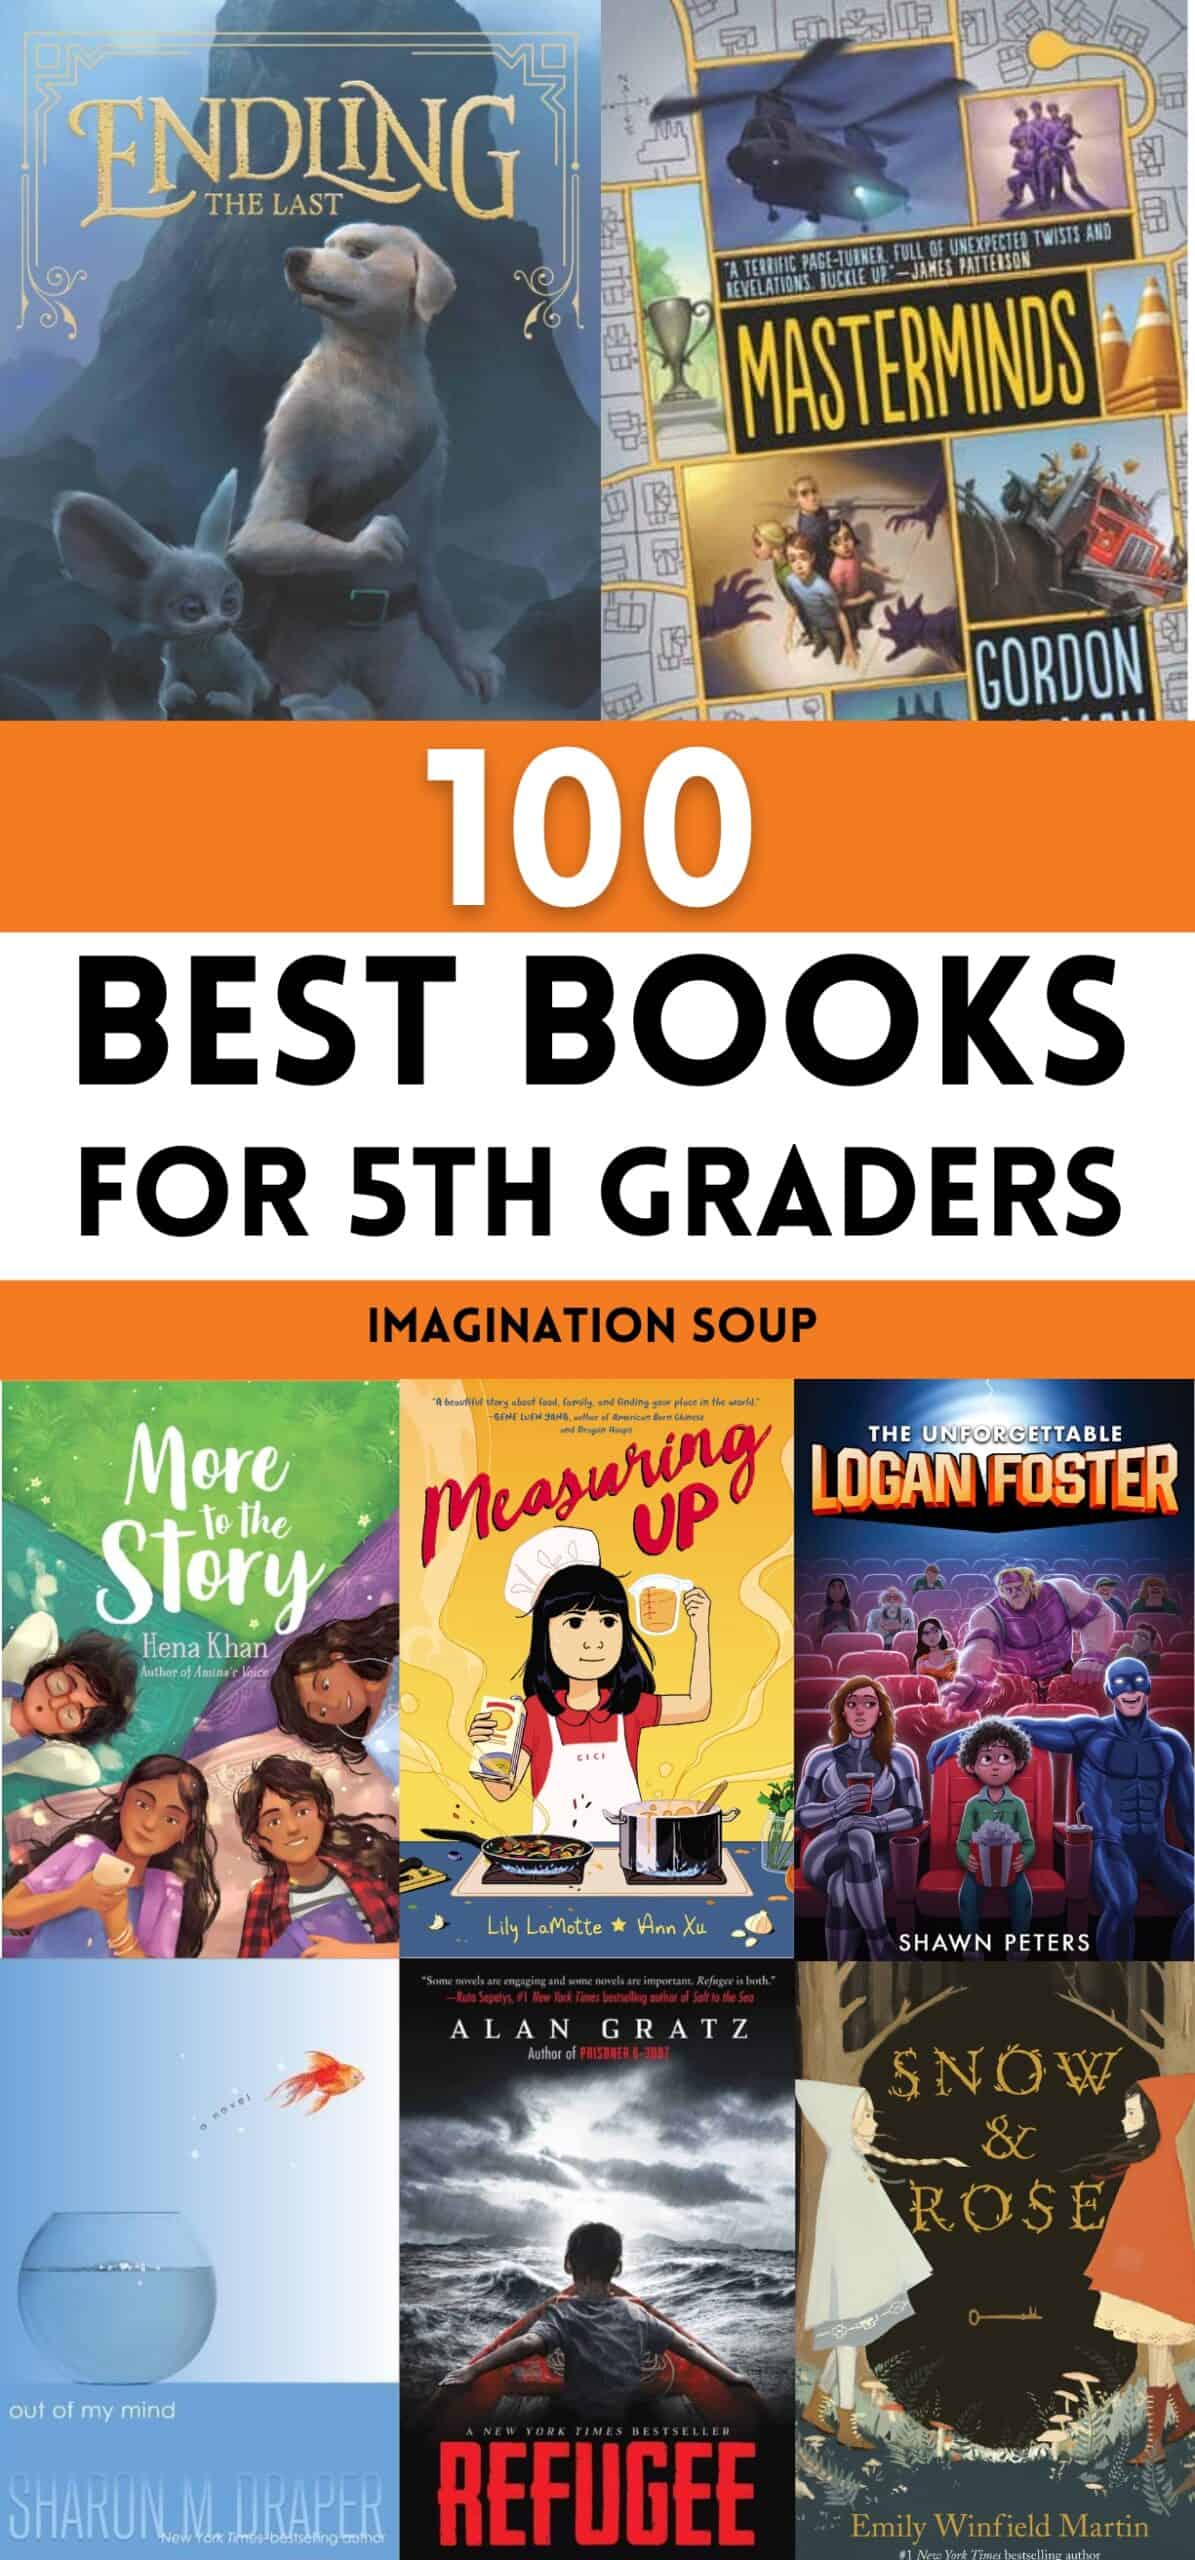 100 BEST BOOKS FOR 5TH GRADERS